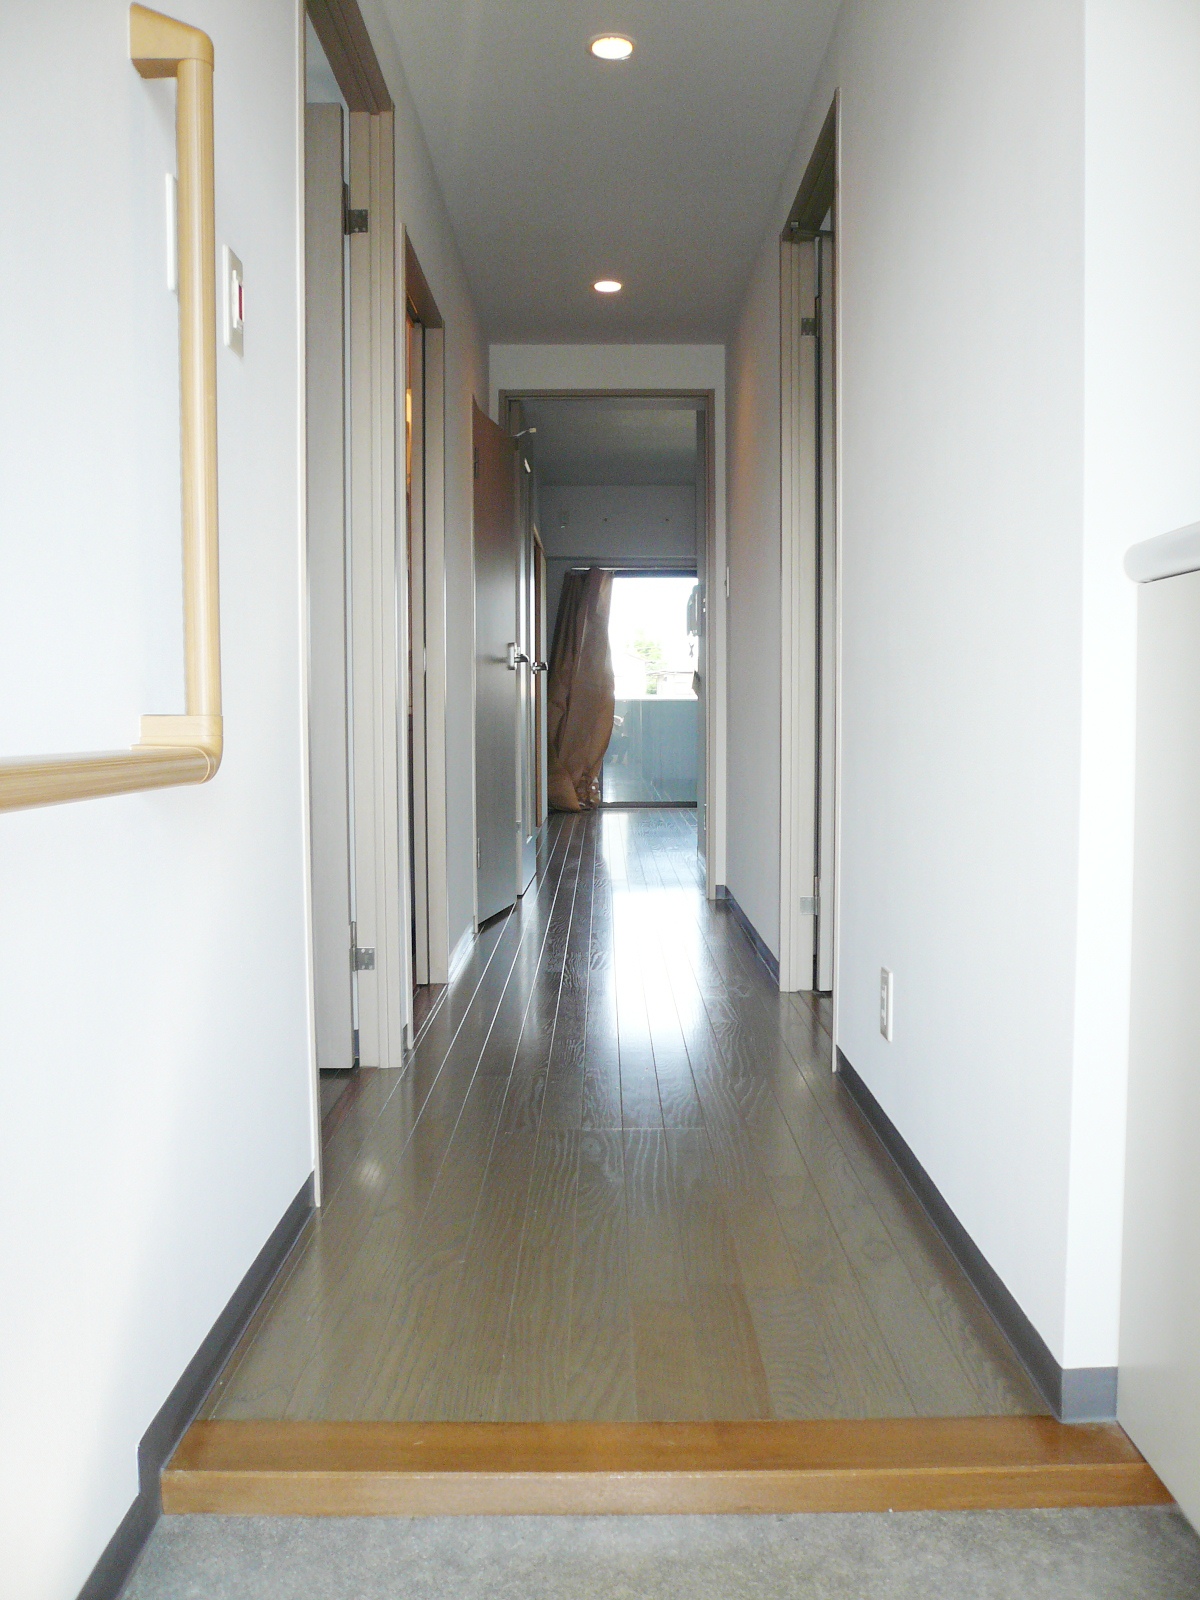 Other room space. Corridor  The same type ・ It will be in a separate dwelling unit photos.